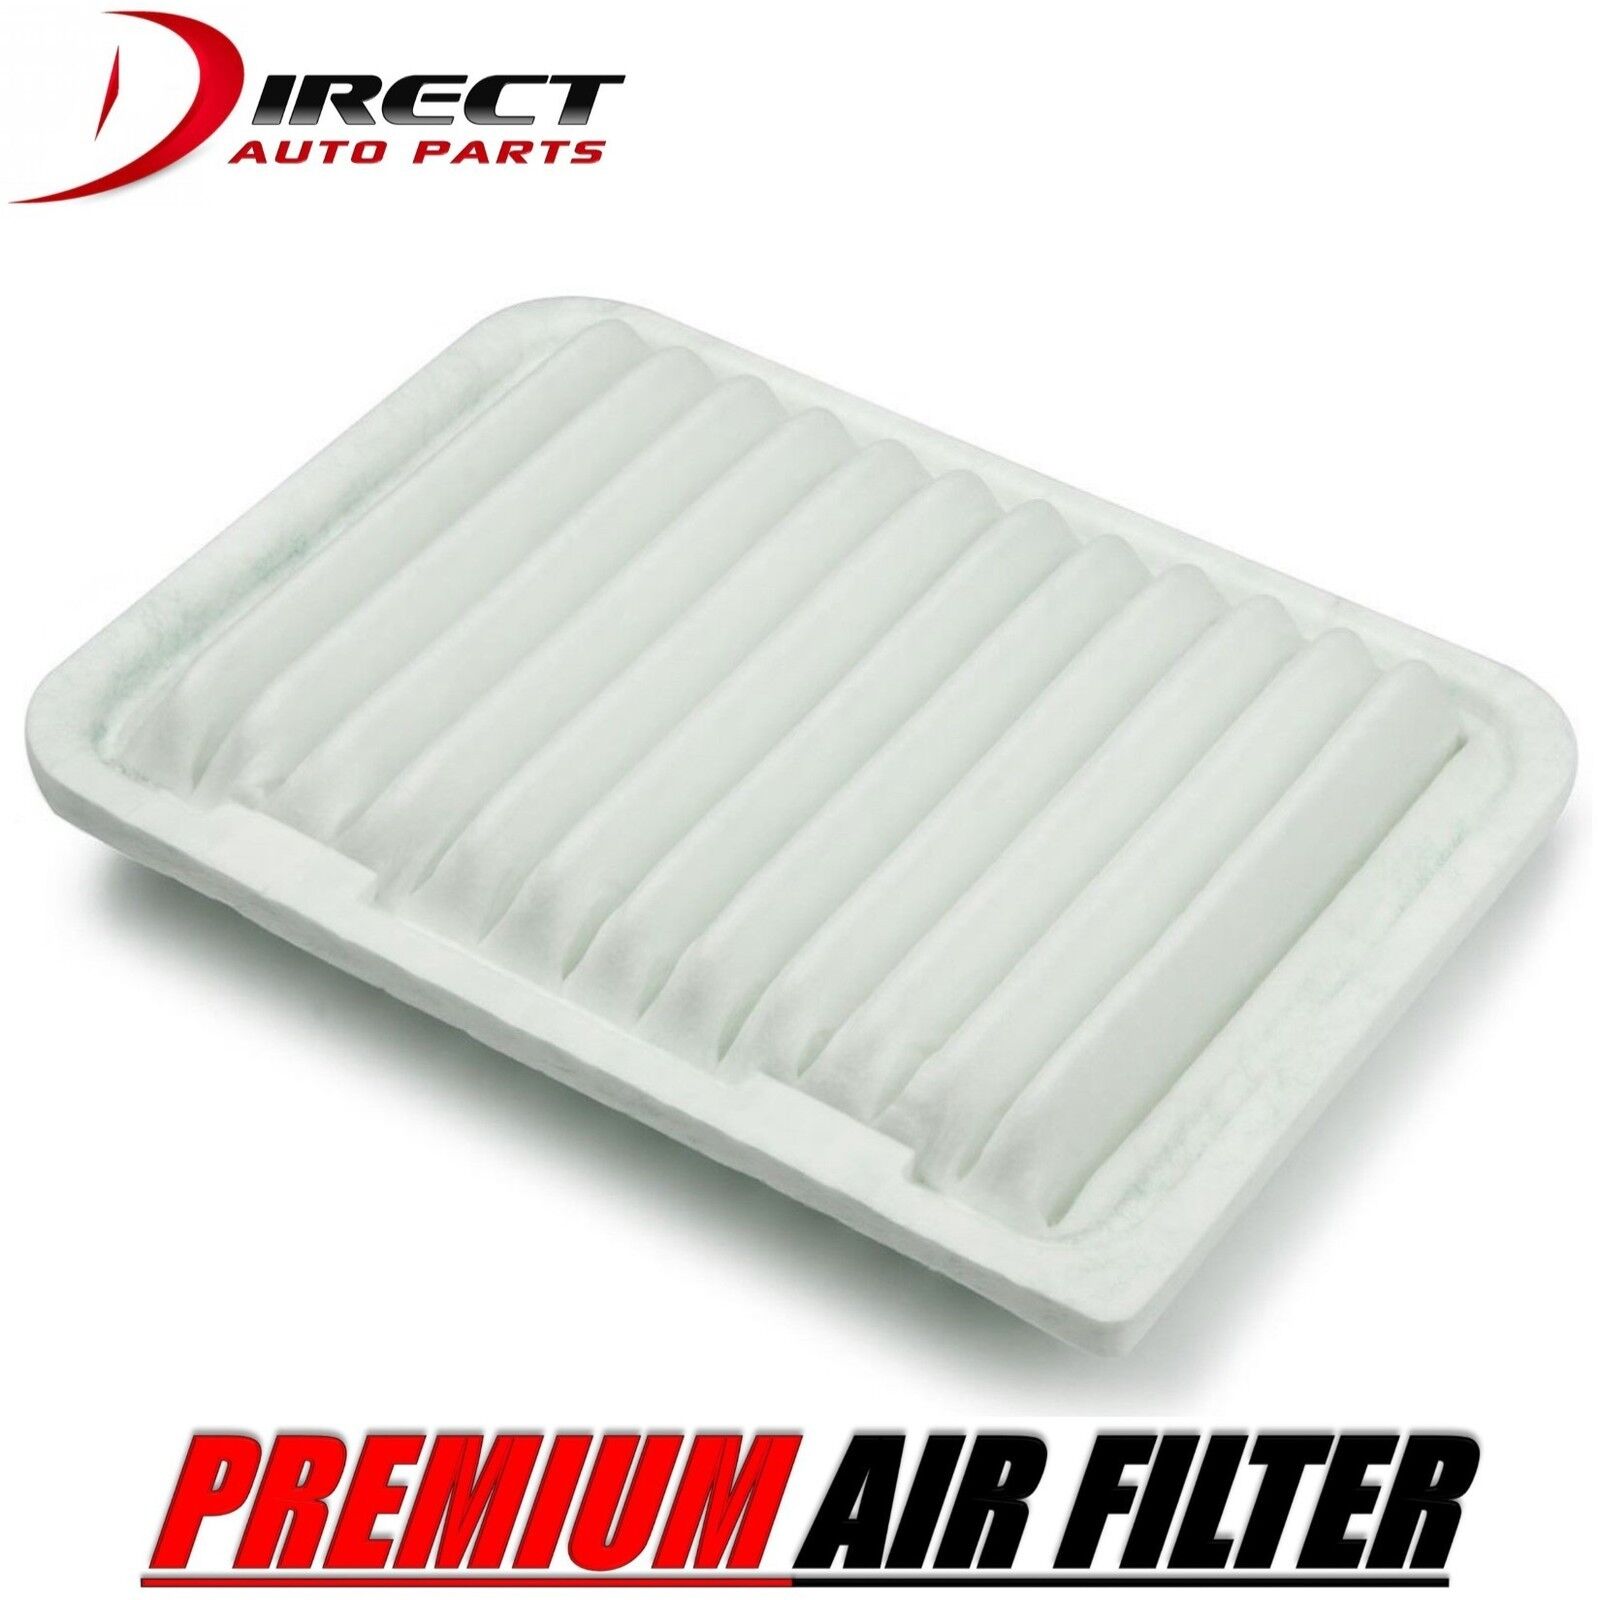 TOYOTA AIR FILTER FOR TOYOTA SIENNA 3.3L ENGINE 2004 - 2006